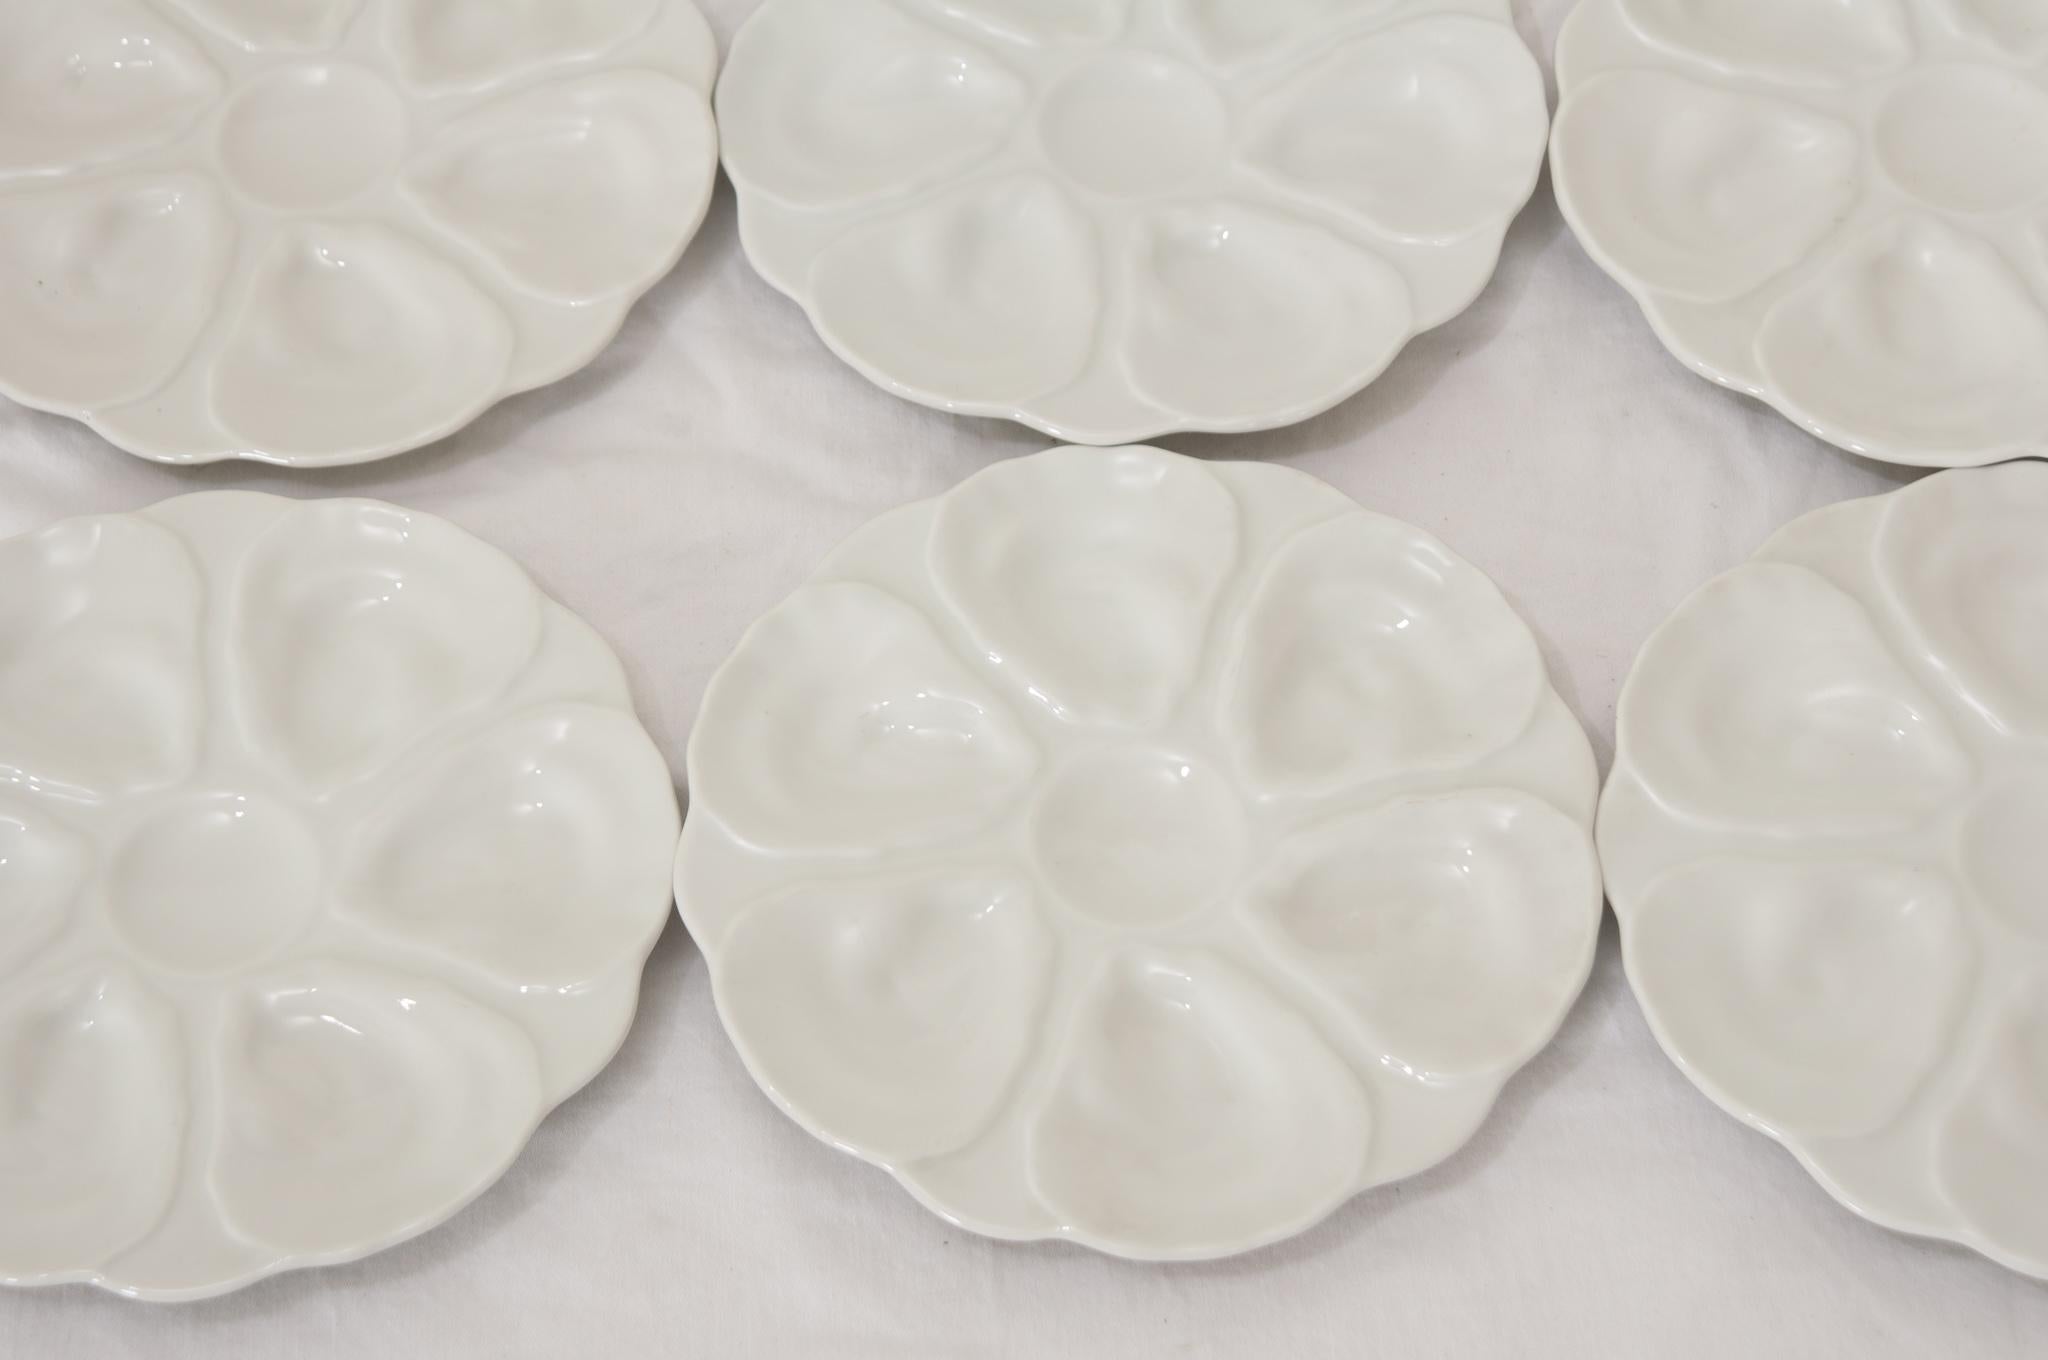 Set of 12 Vintage Hutschenreuther Oyster Plates In Good Condition For Sale In Baton Rouge, LA